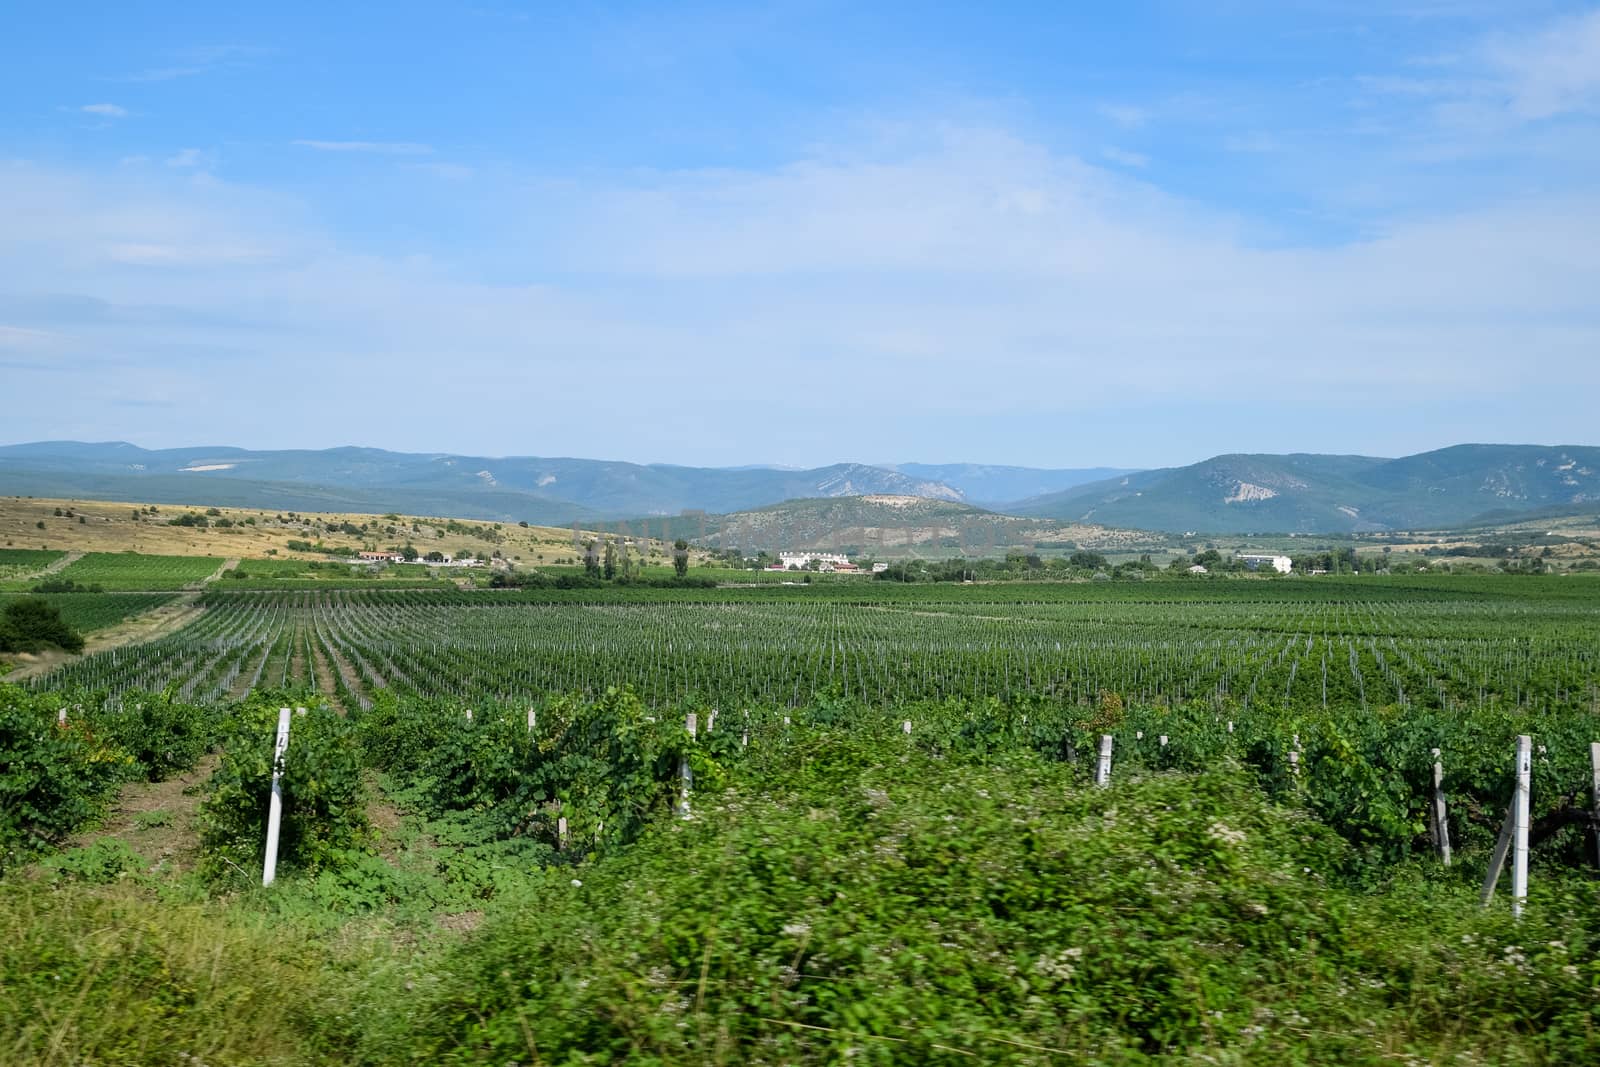 Fields with vineyards on trellises. a Hills with vineyards.